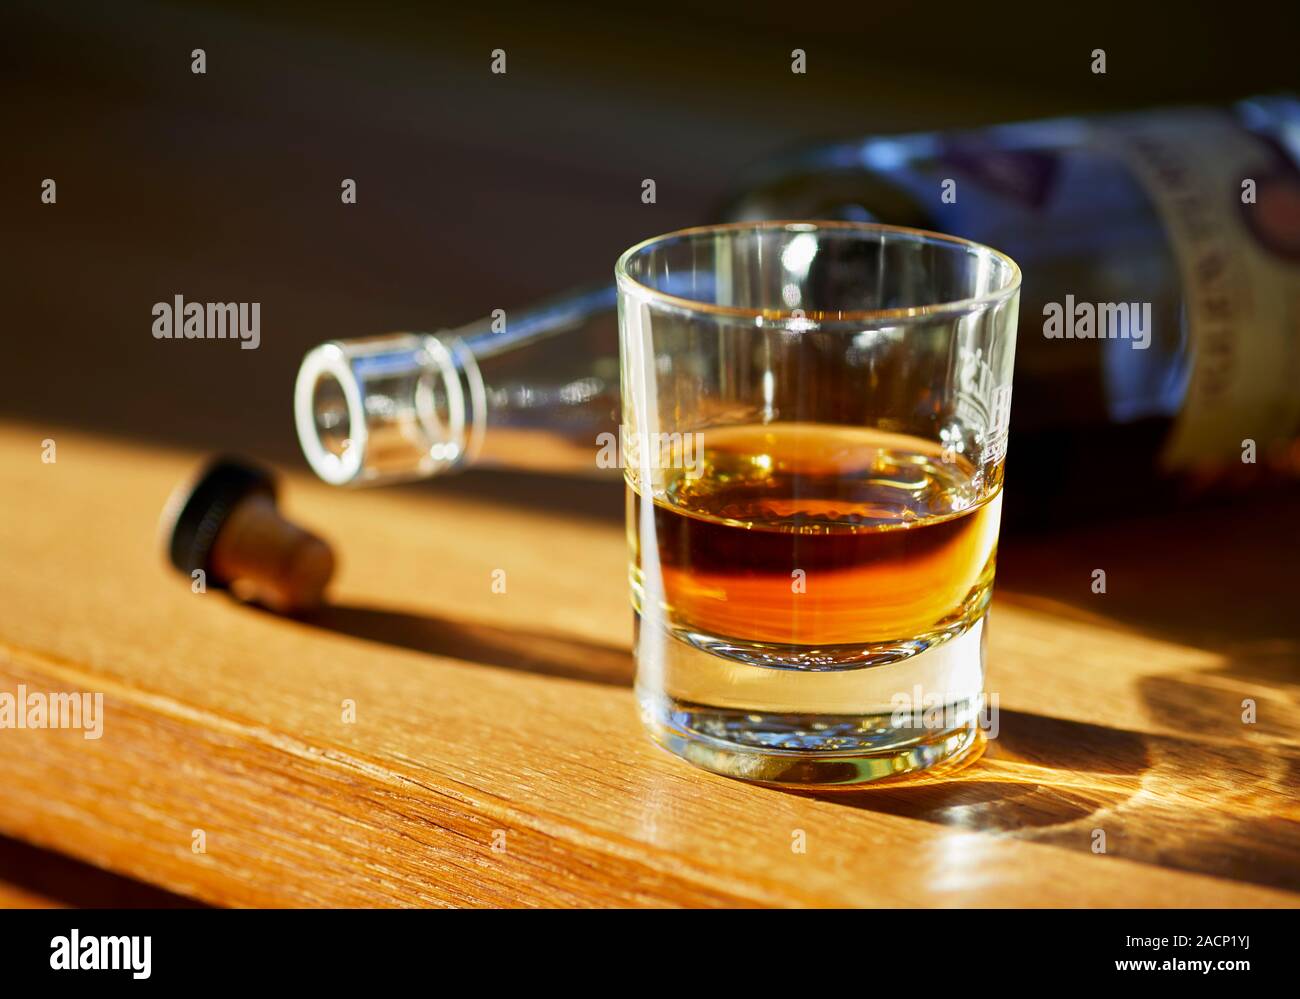 Whisky glass and bottle Stock Photo